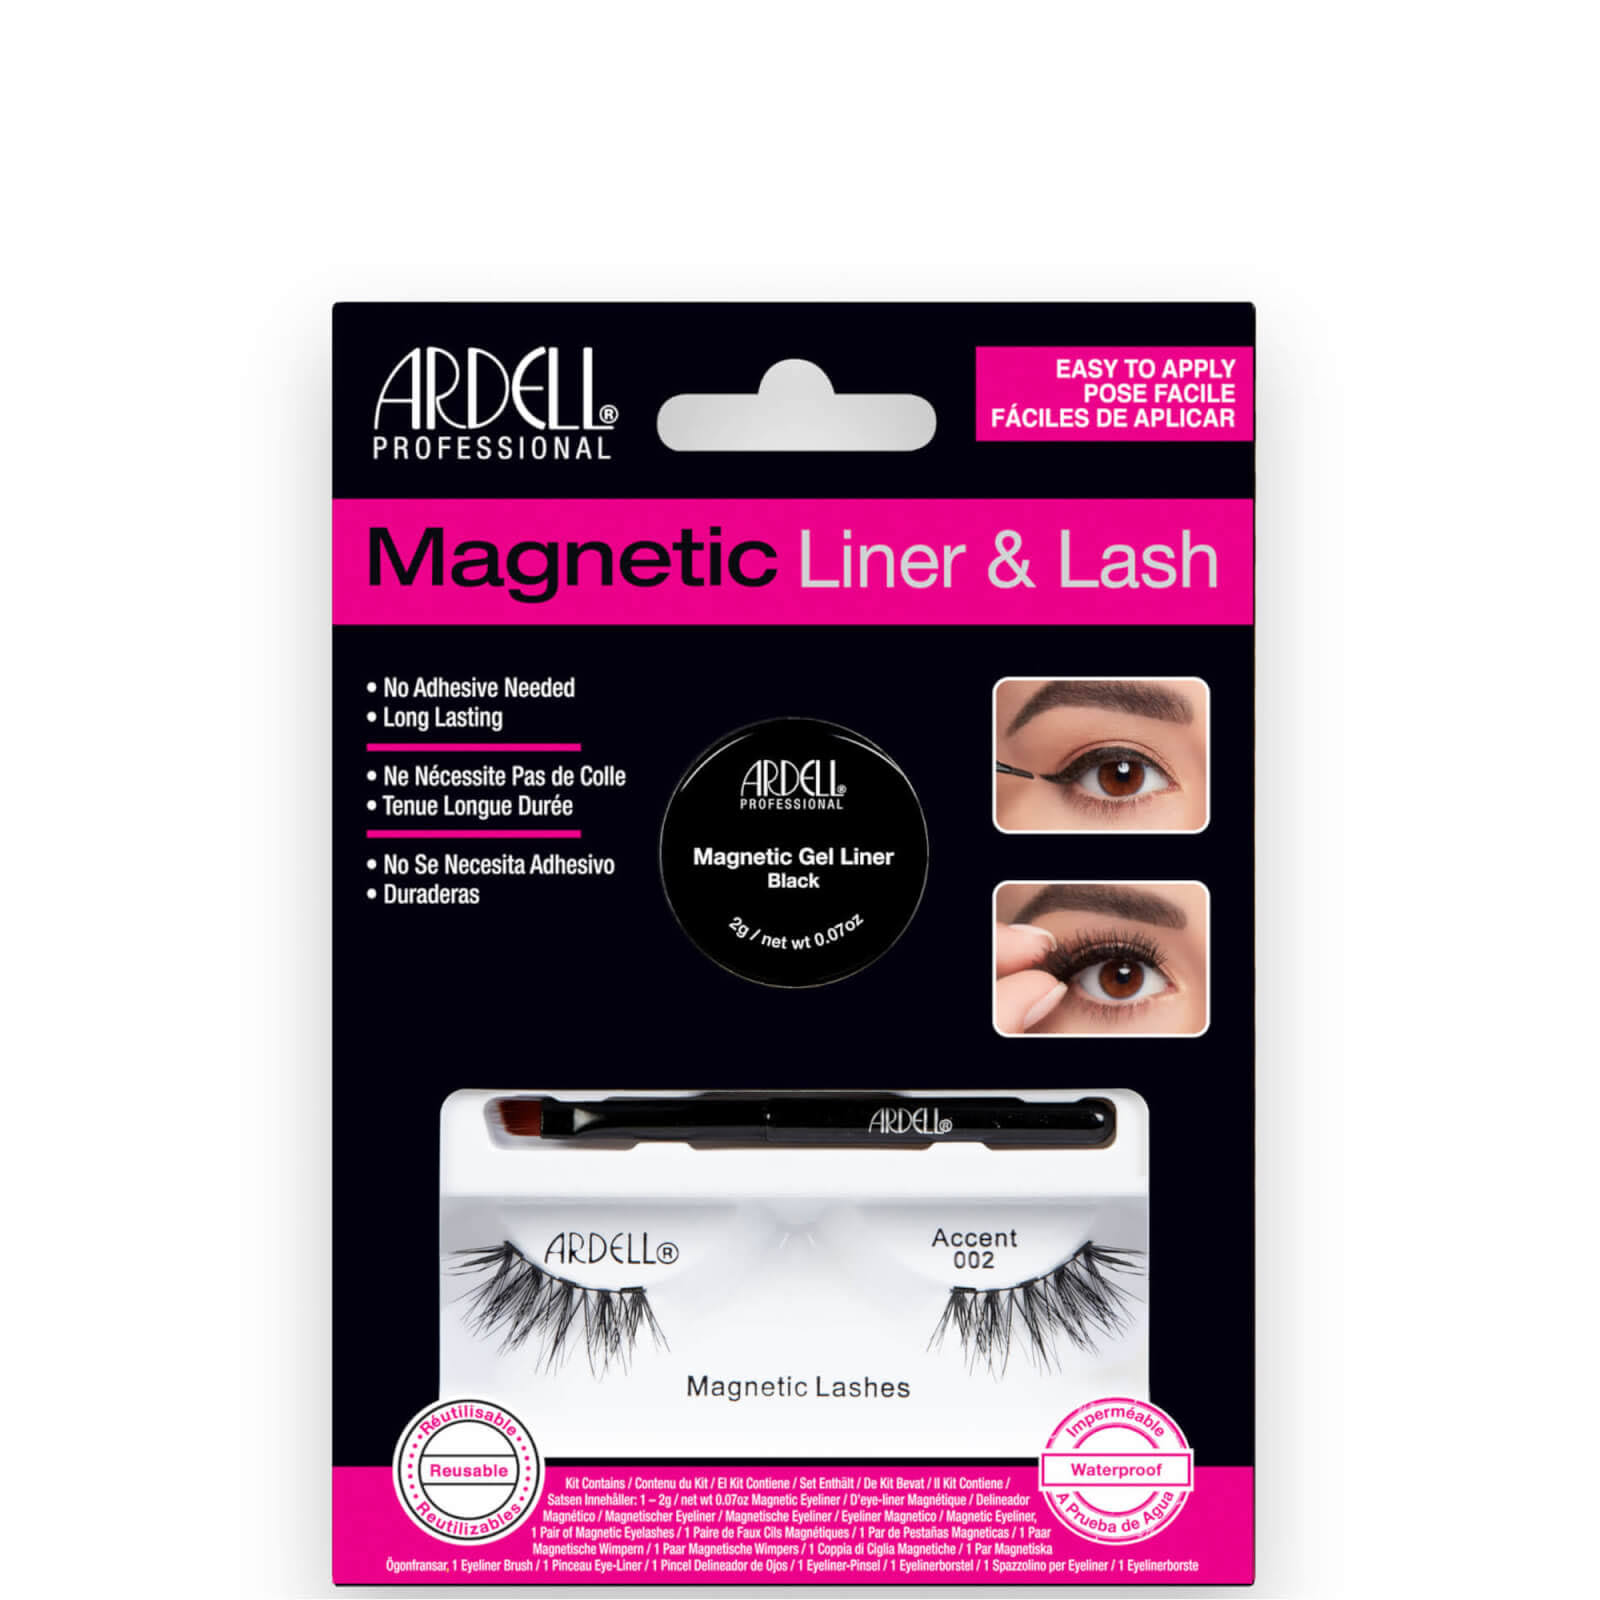 Ardell Magnetic Lash and Liner Kit - Accent 002, 2g